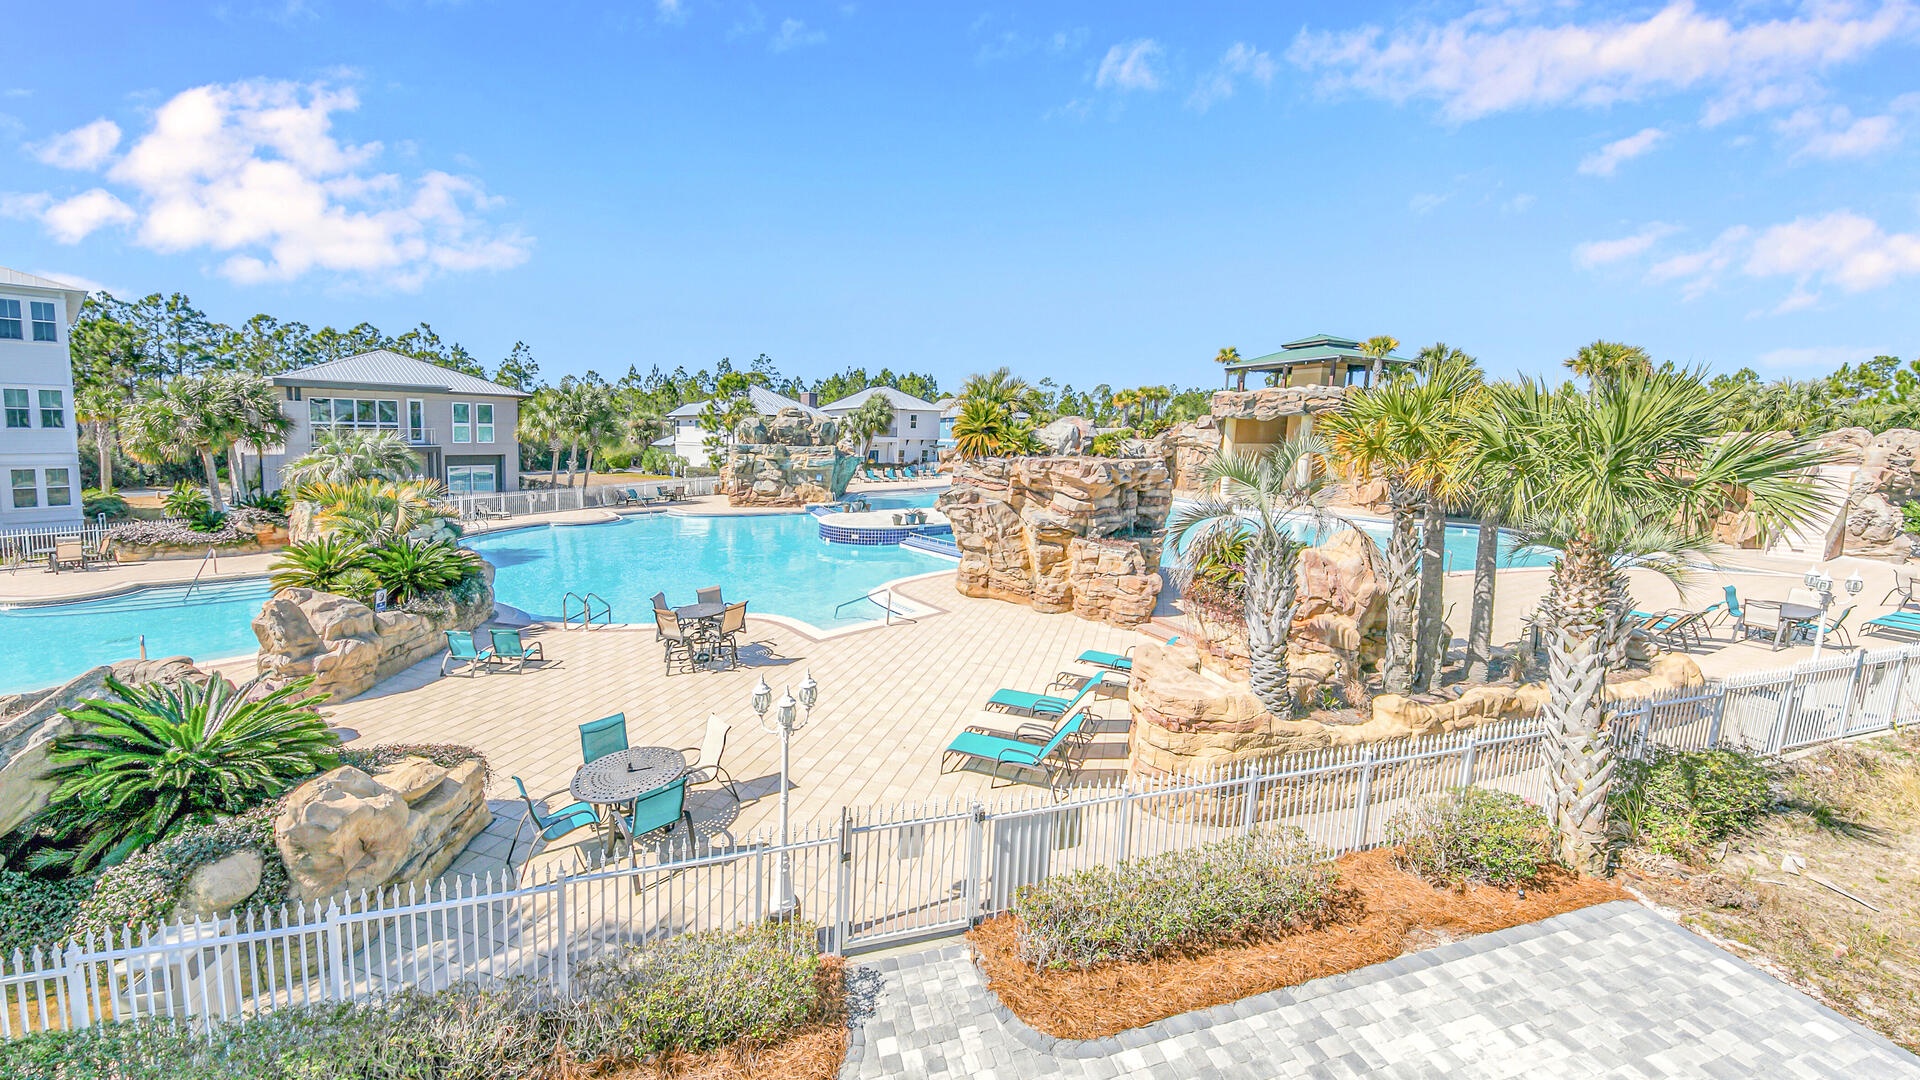 Enjoy expansive pool views from the balconies!